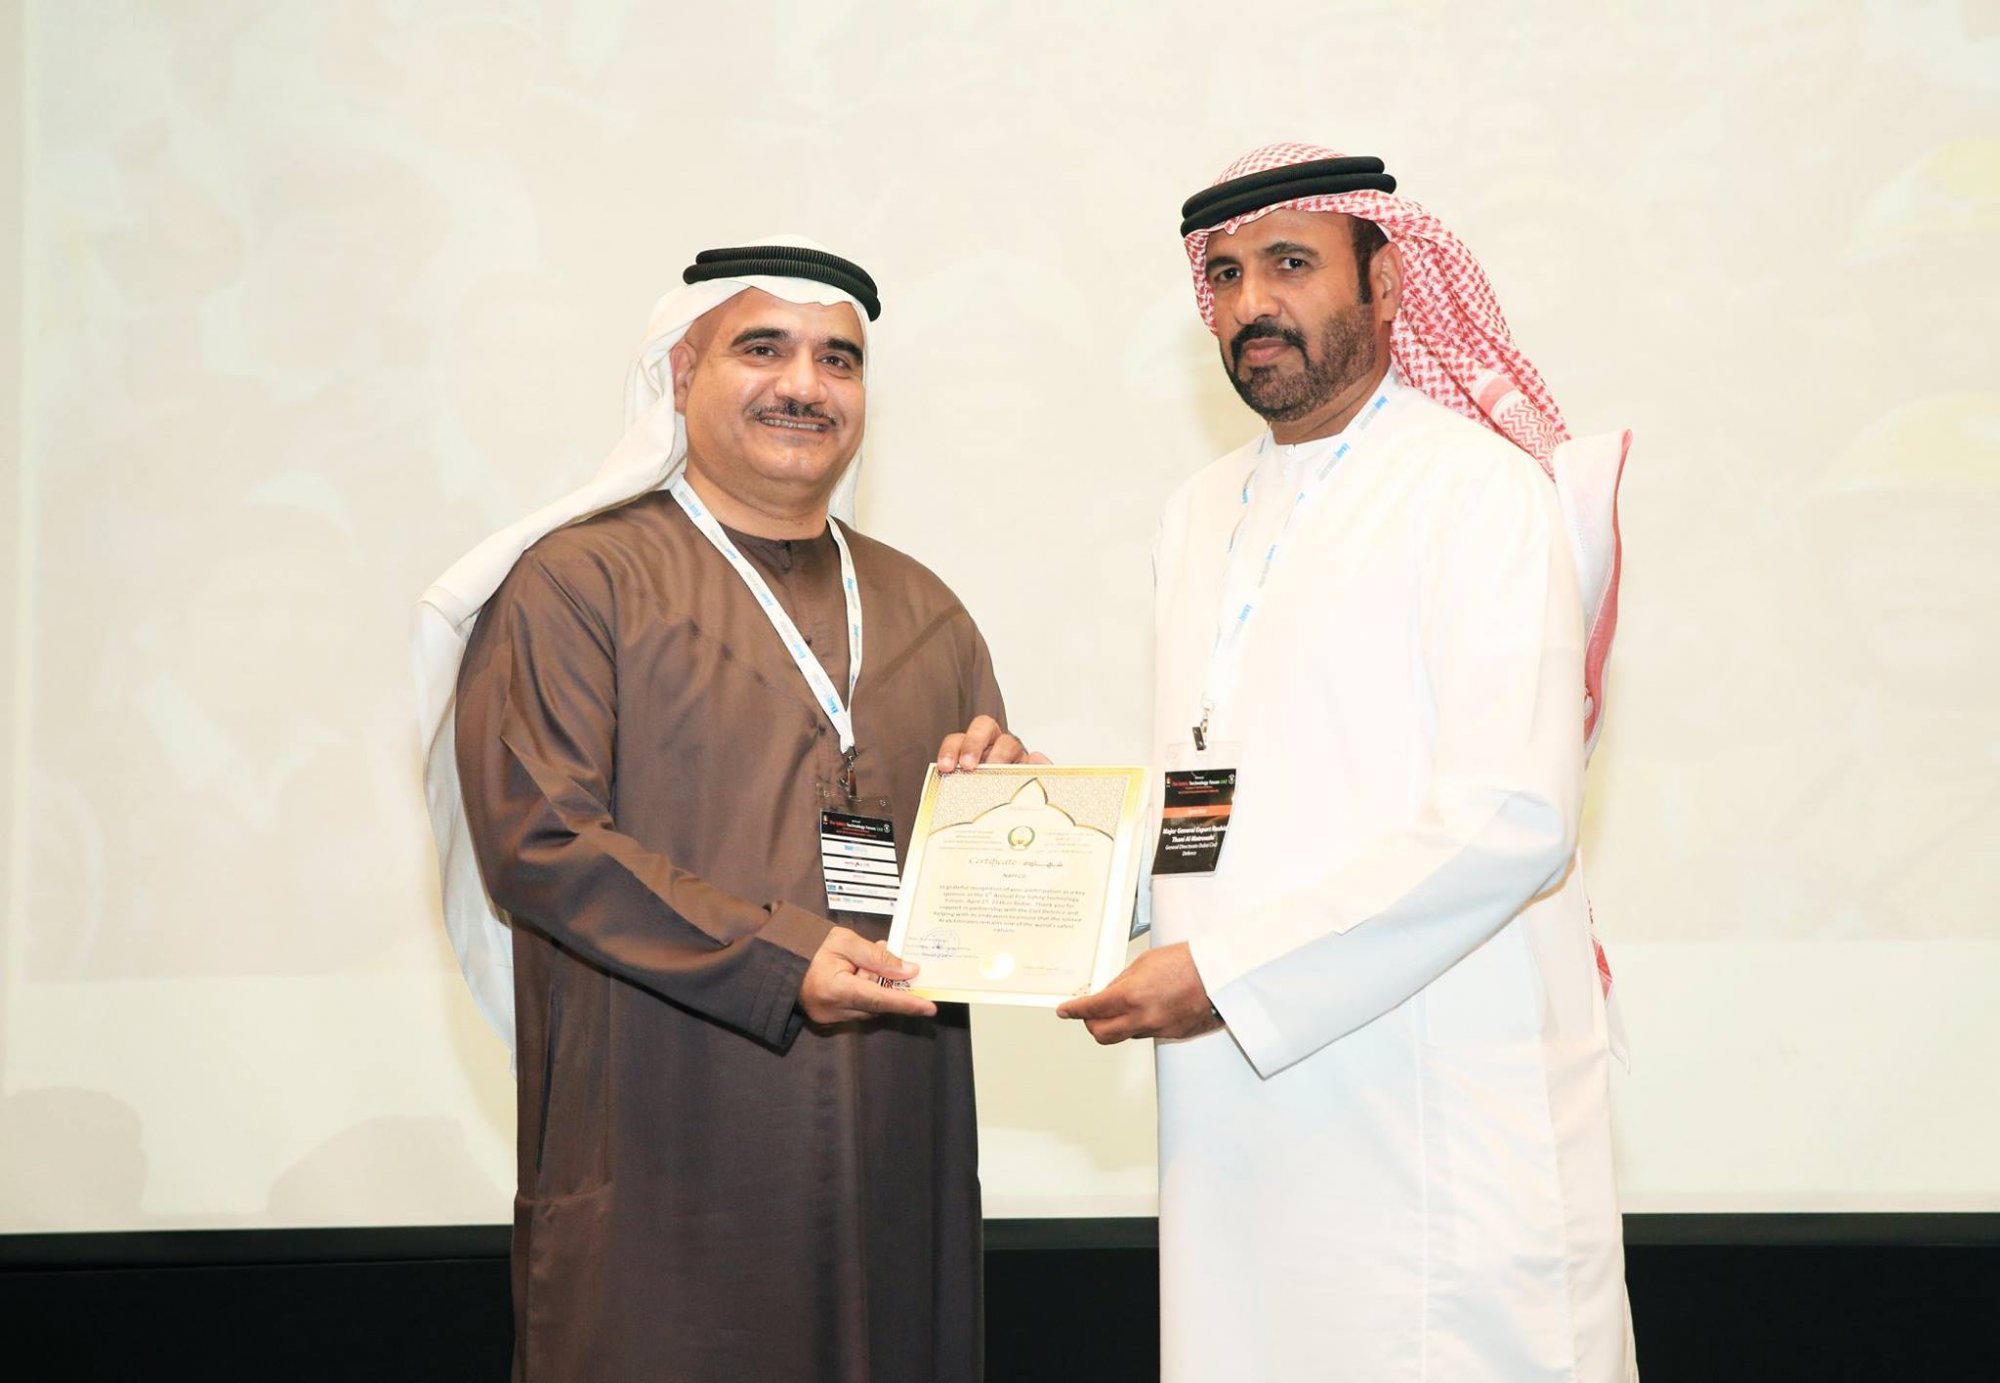 NAFFCO proudly participated in the 6th edition of the Annual Fire Safety Technology Forum